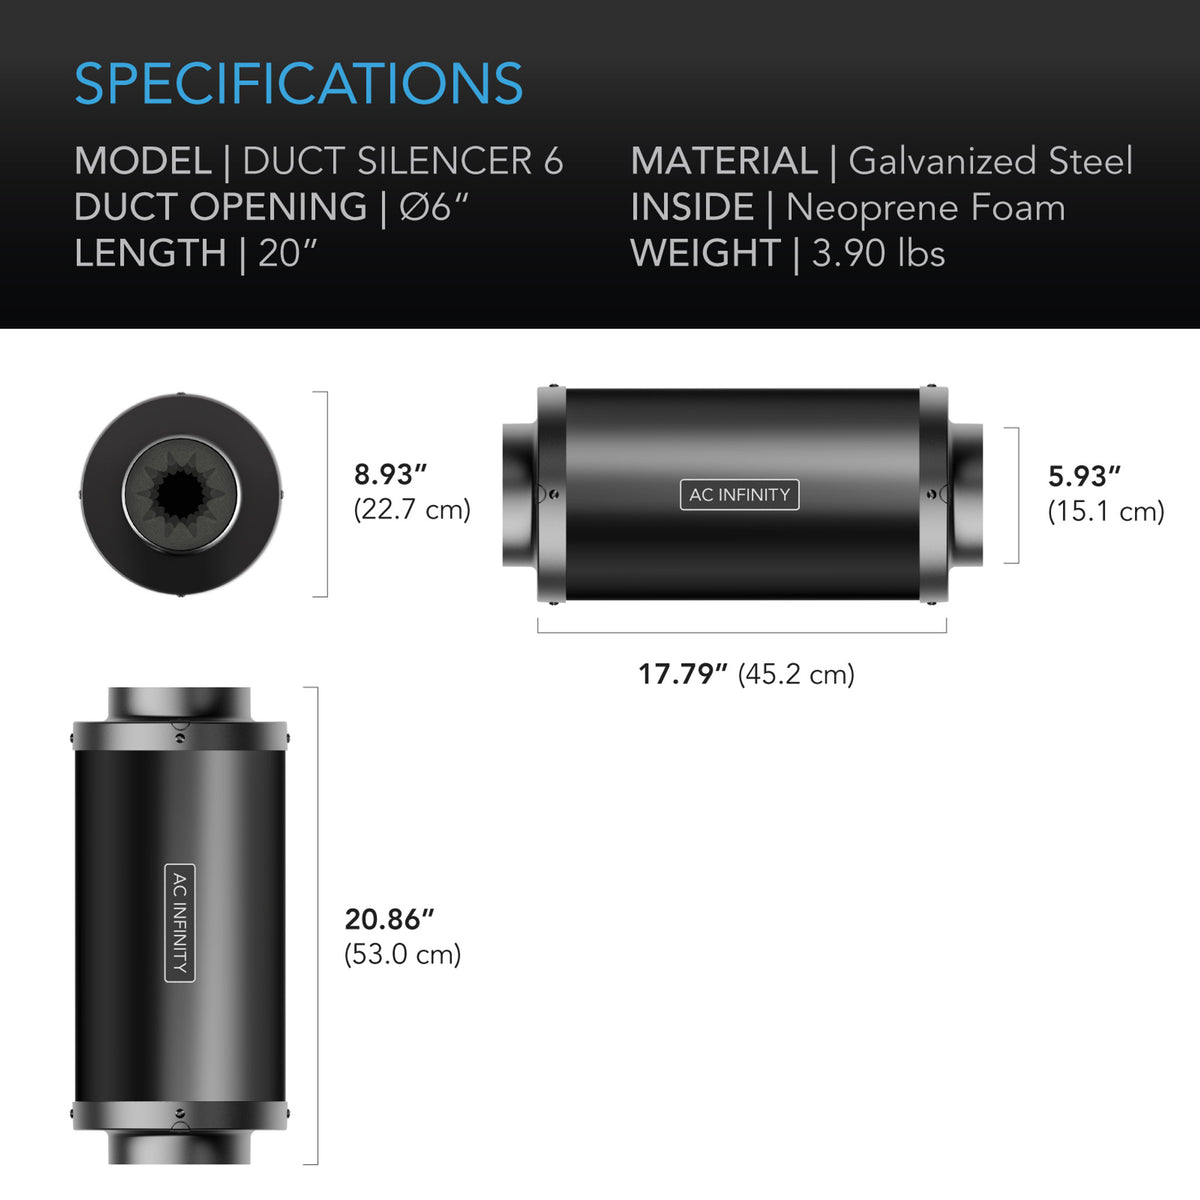 Duct silencer 6 inch specifications